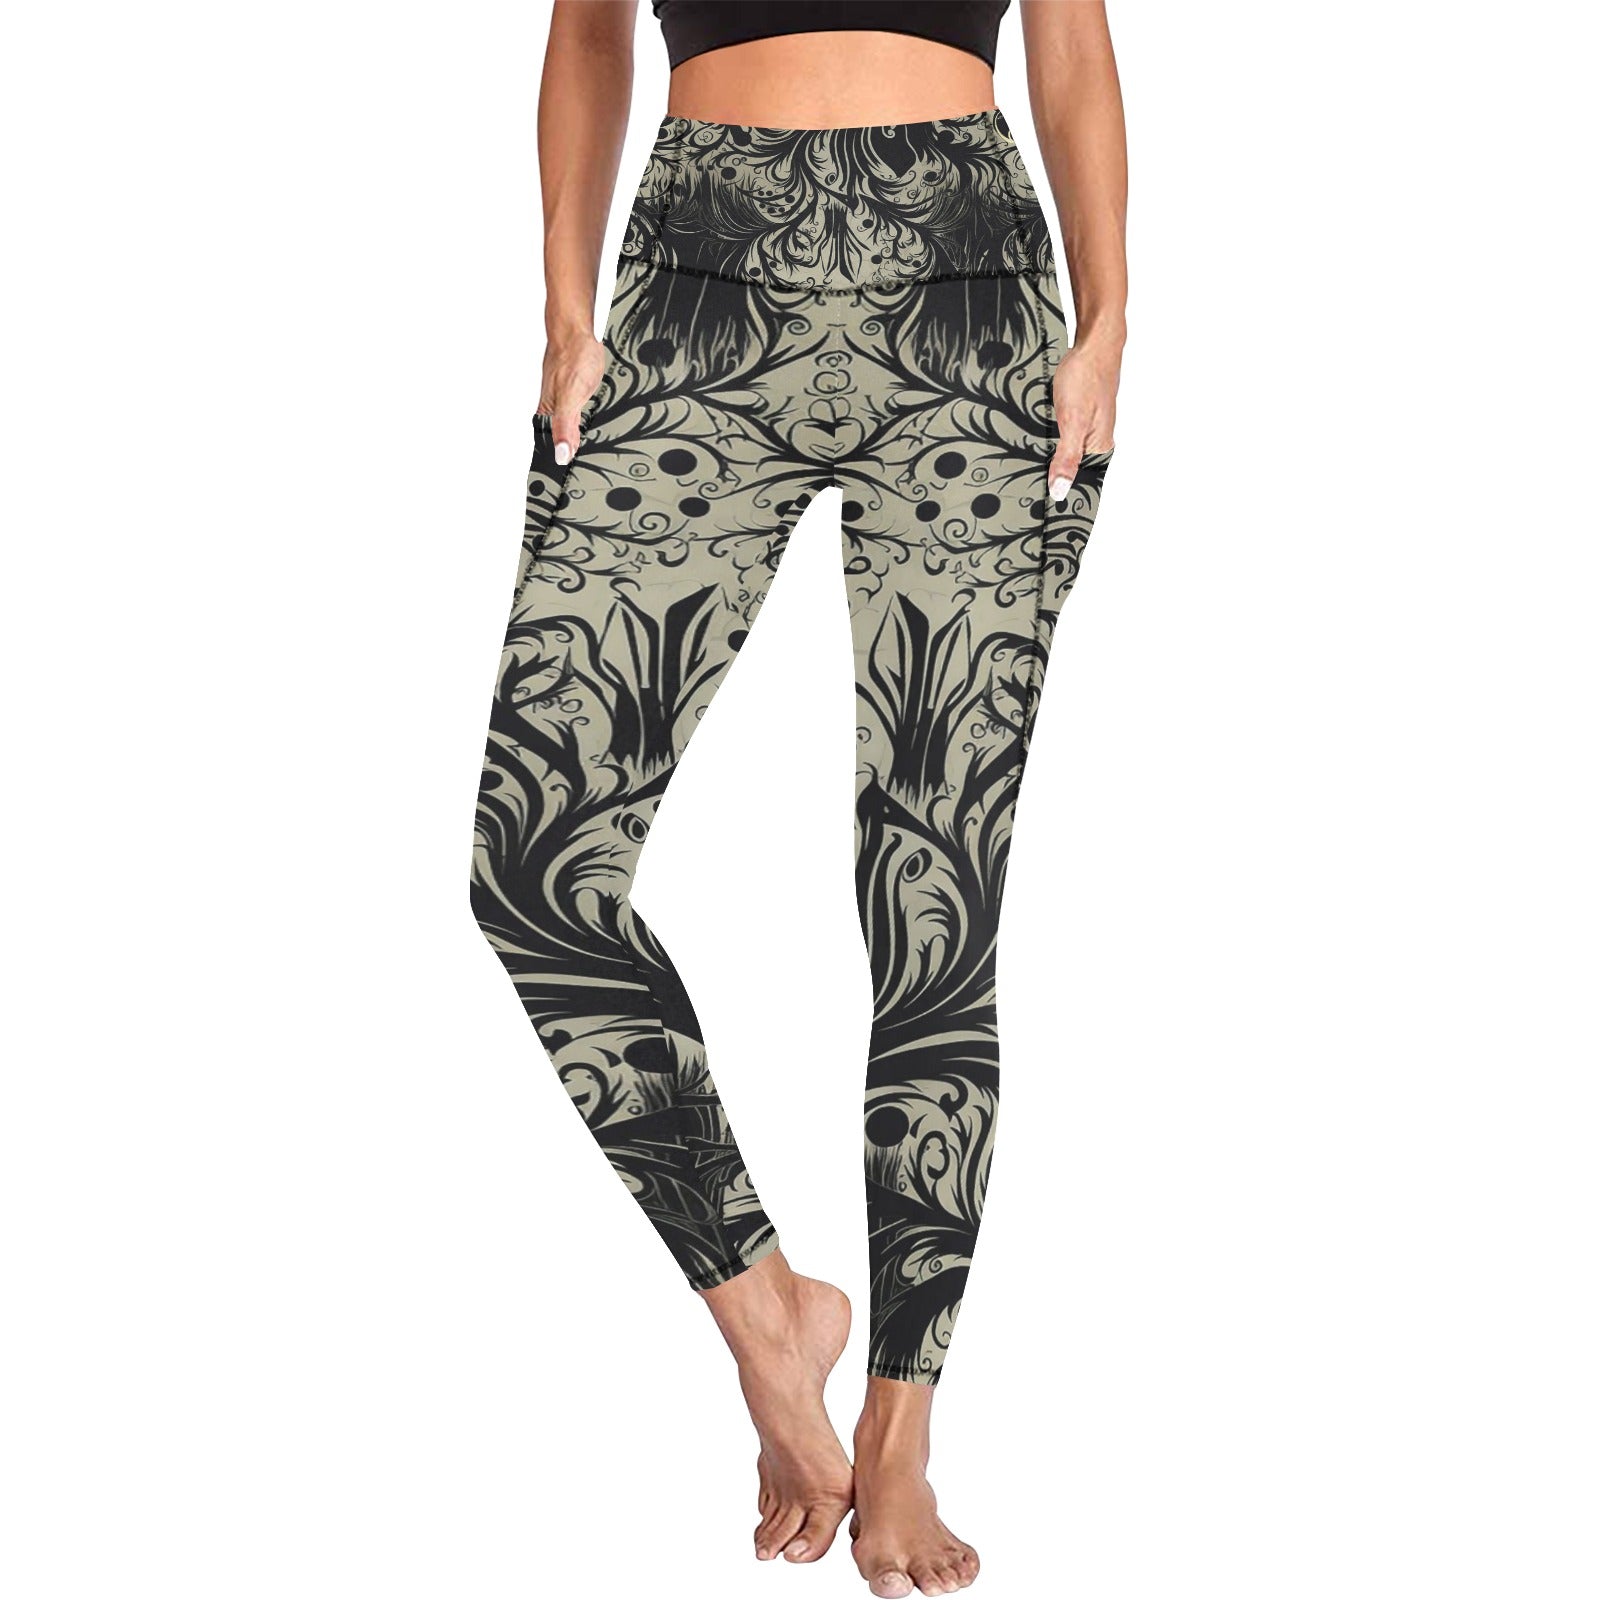 Gothic Design Leggings with Pockets